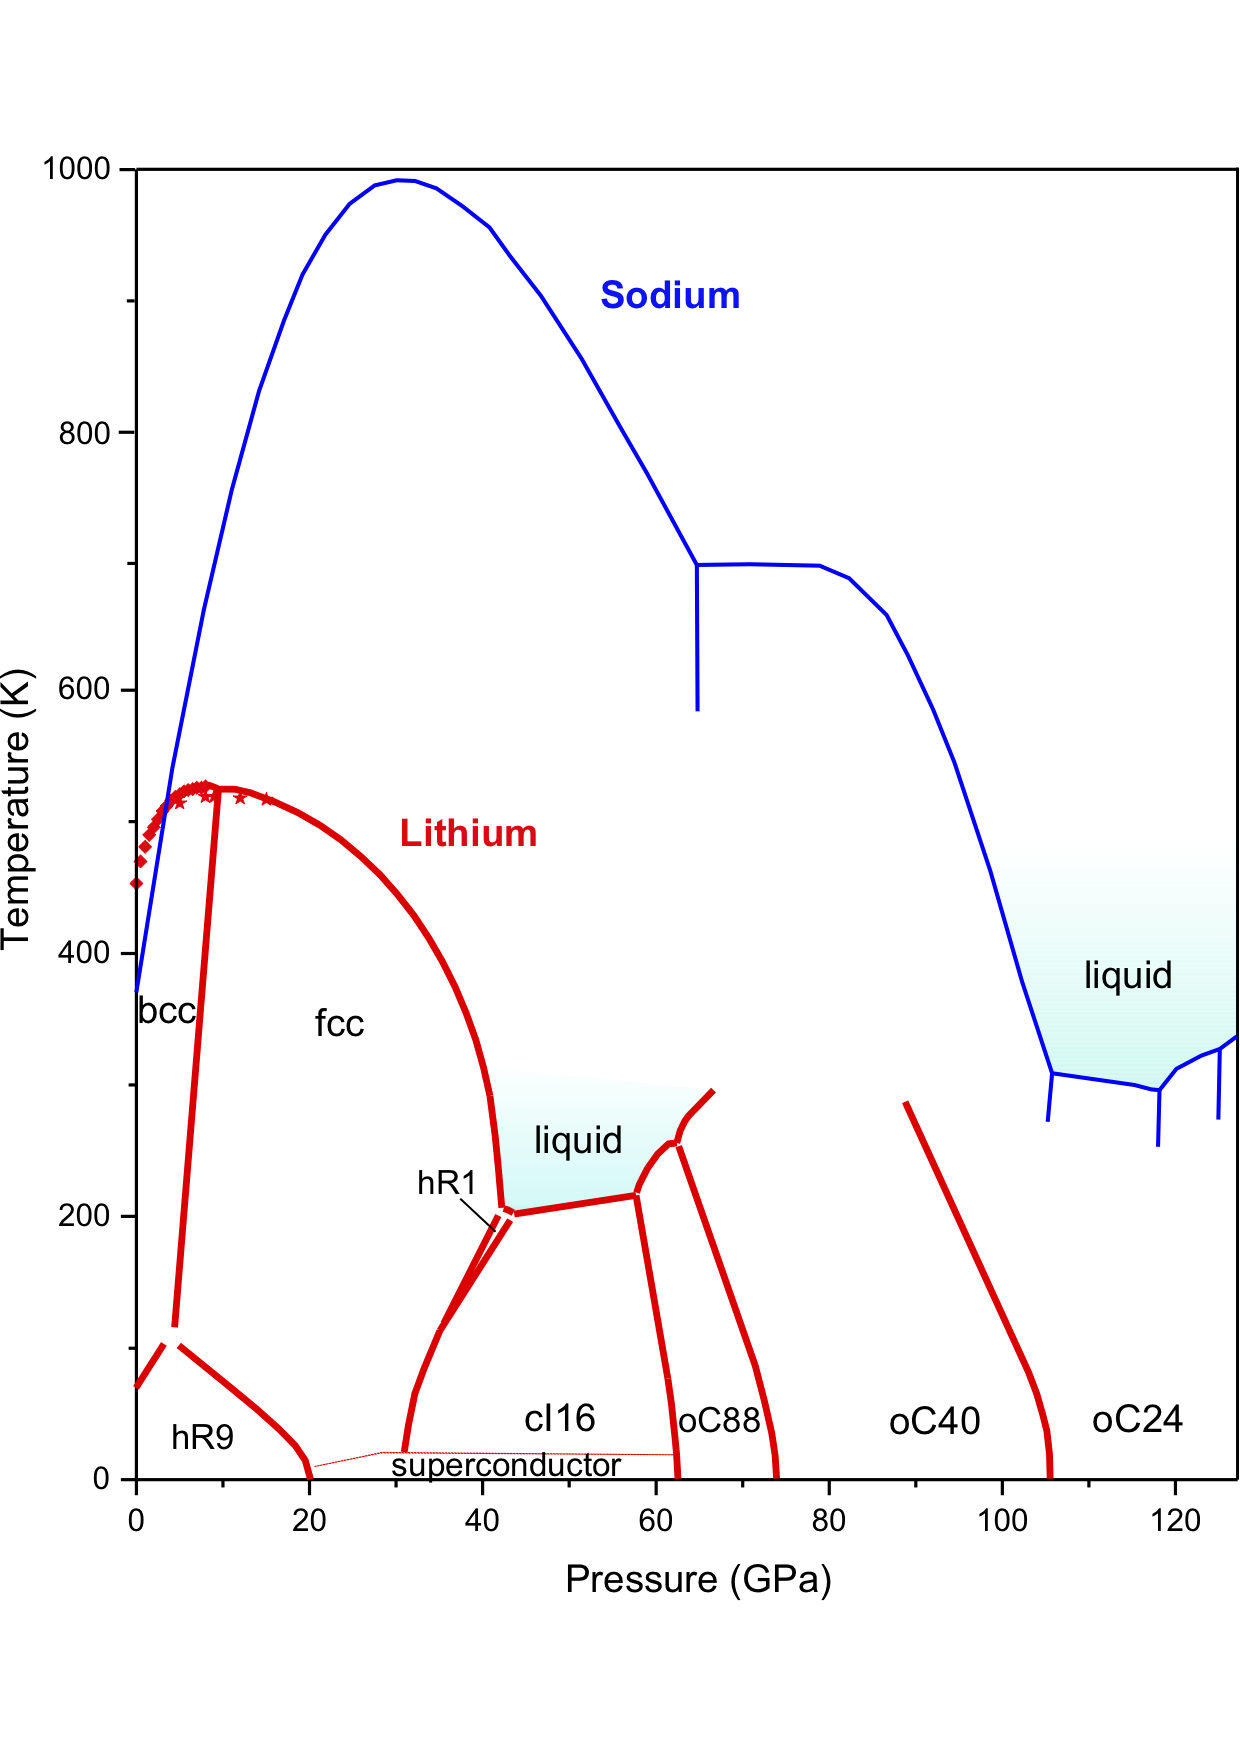 Simple Lithium Good For Many Surprises